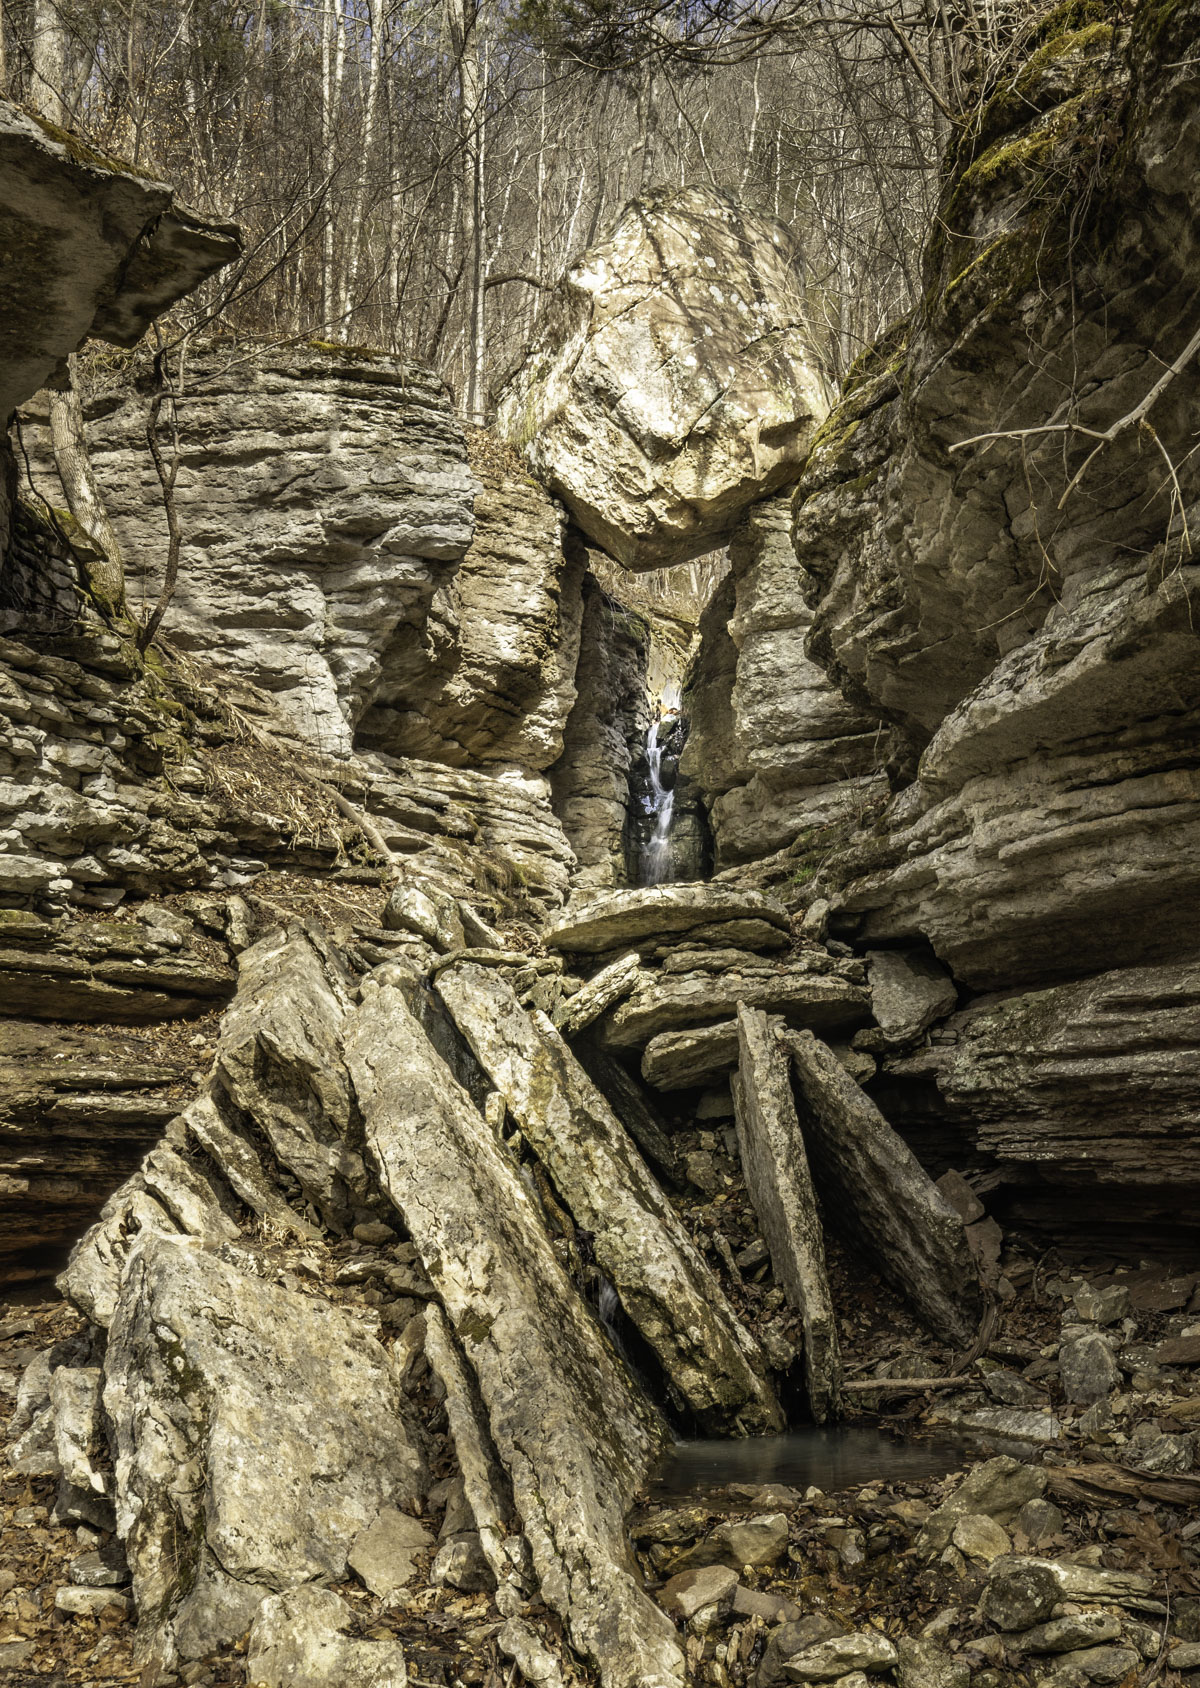 You’ll know it when you see it: A waterfall flows beneath Balanced Rock, an enormous boulder perched on the edge of a gorge bluff high above Leatherwood Creek. (Photo by Sony Hocklander)